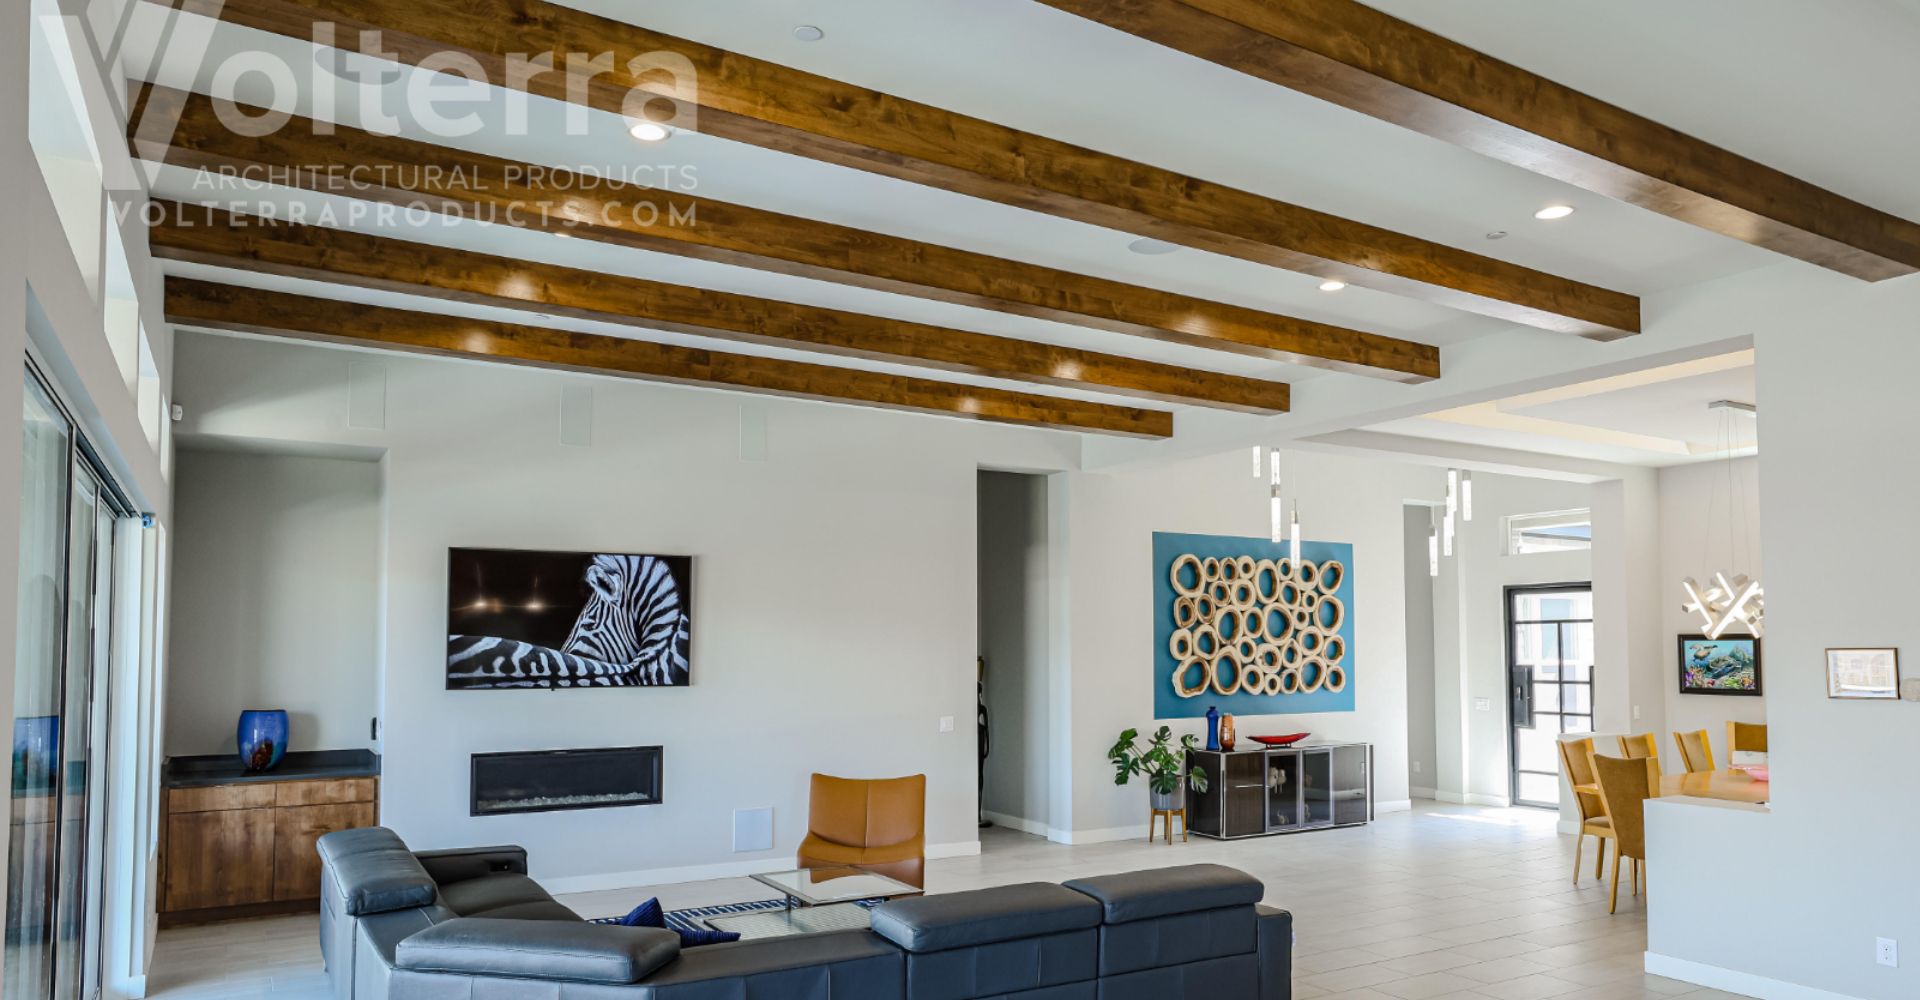 Things You Should Know About Real Wood Ceiling Beams